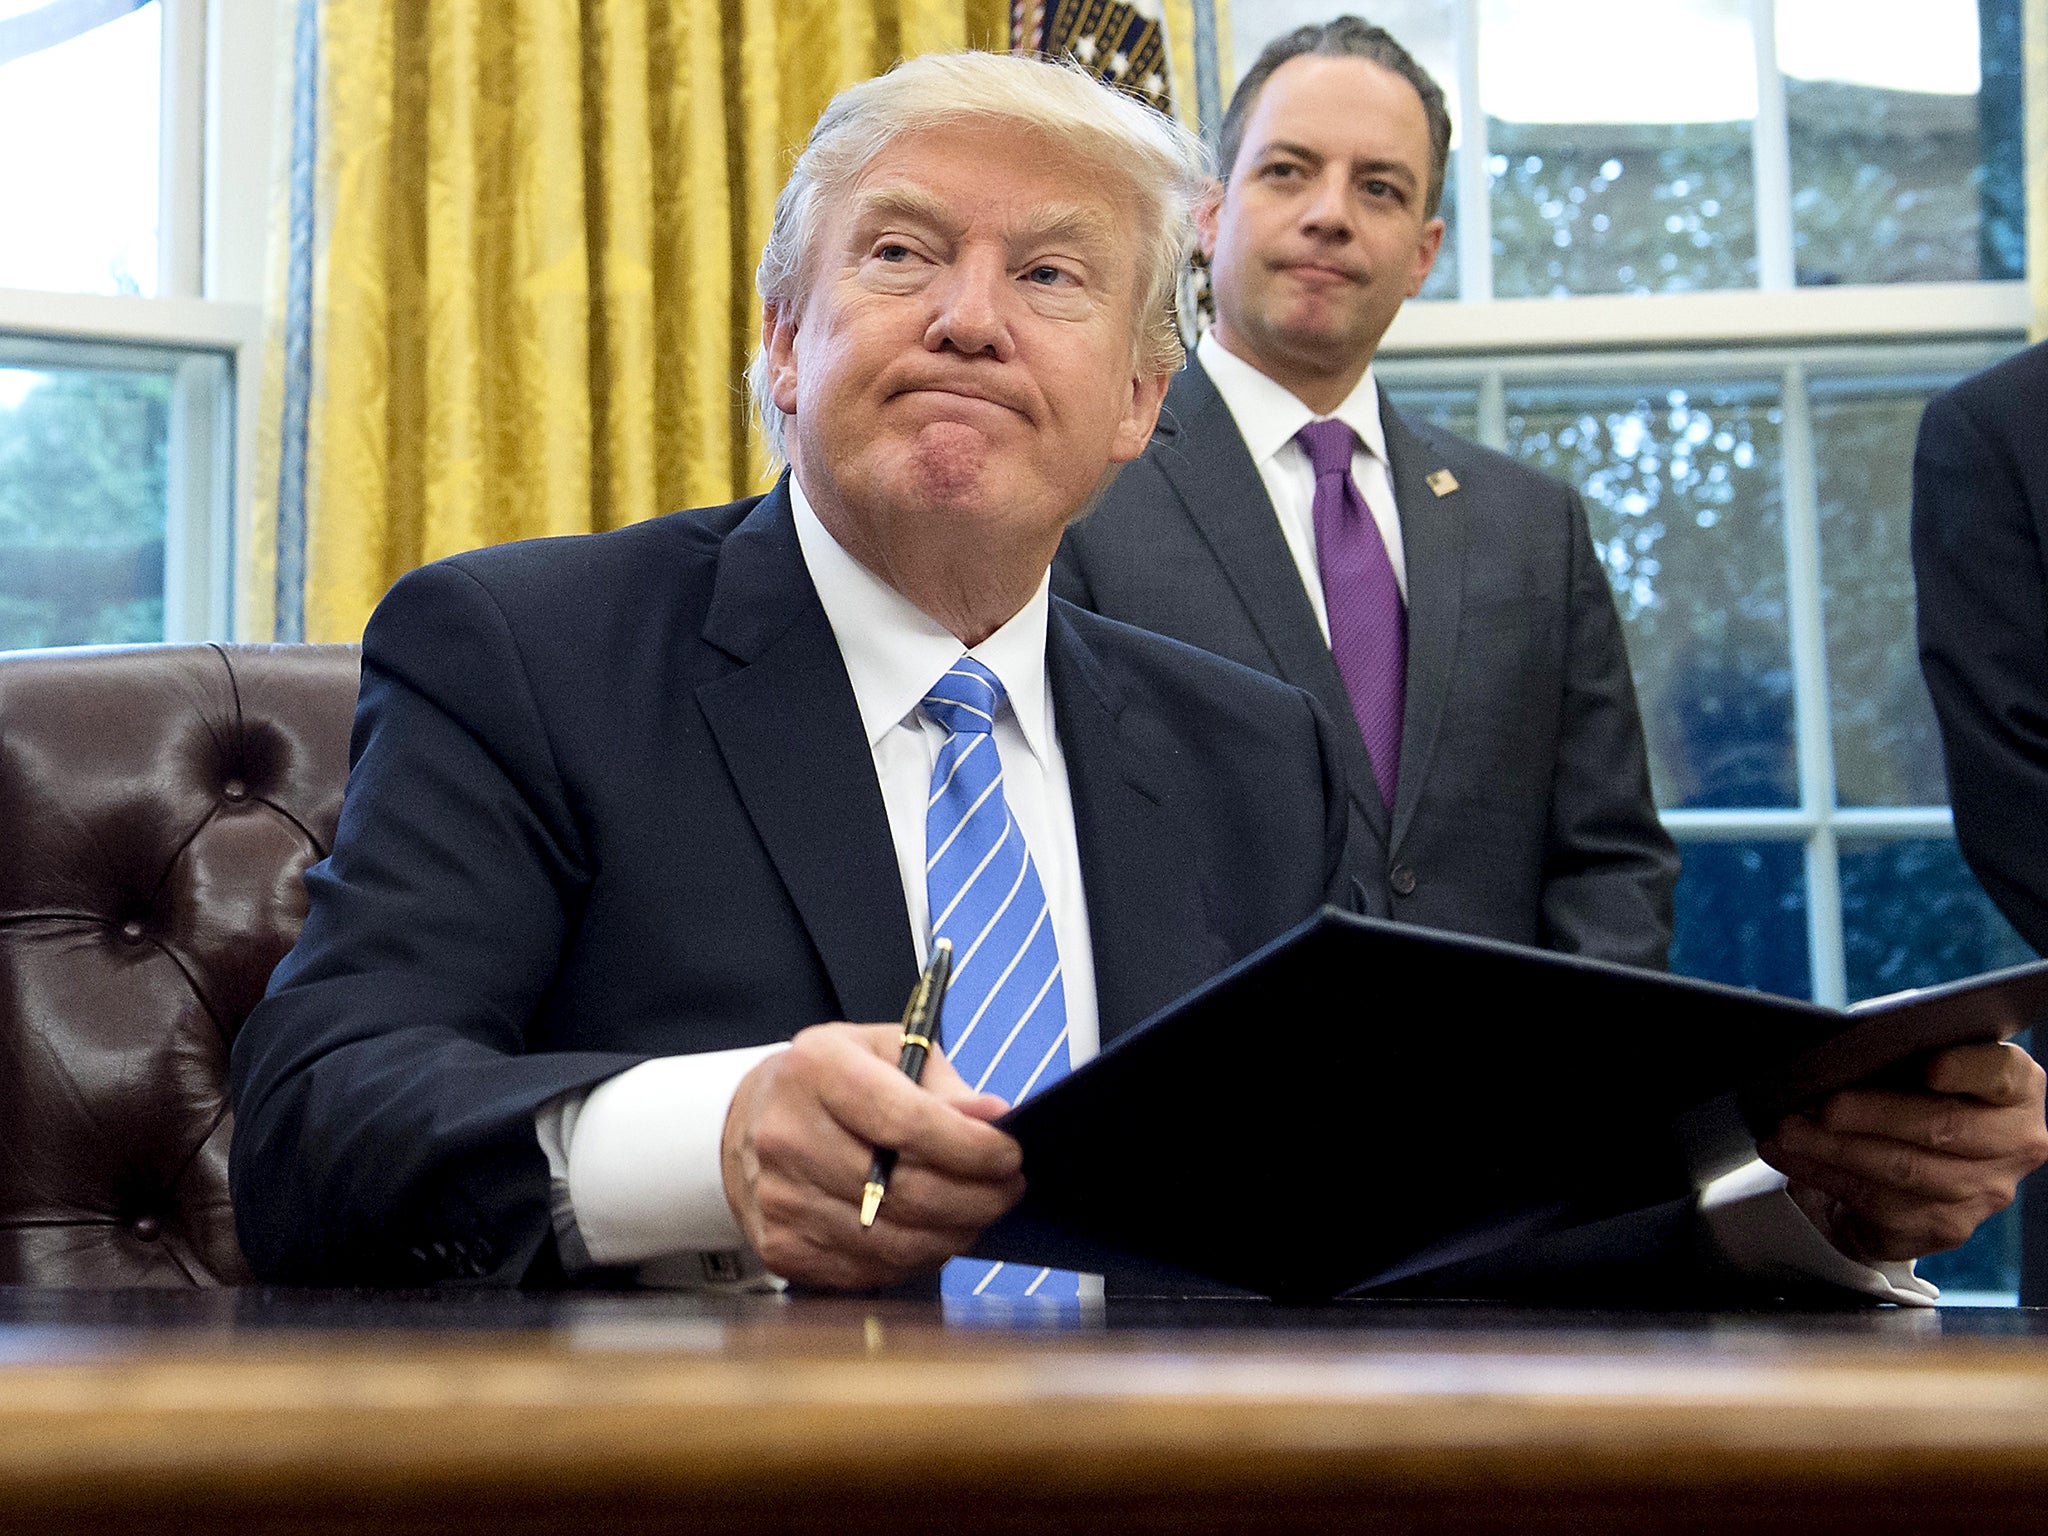 US President Donald Trump signs an executive order as Chief of Staff Reince Priebus looks on in the Oval Office of the White House